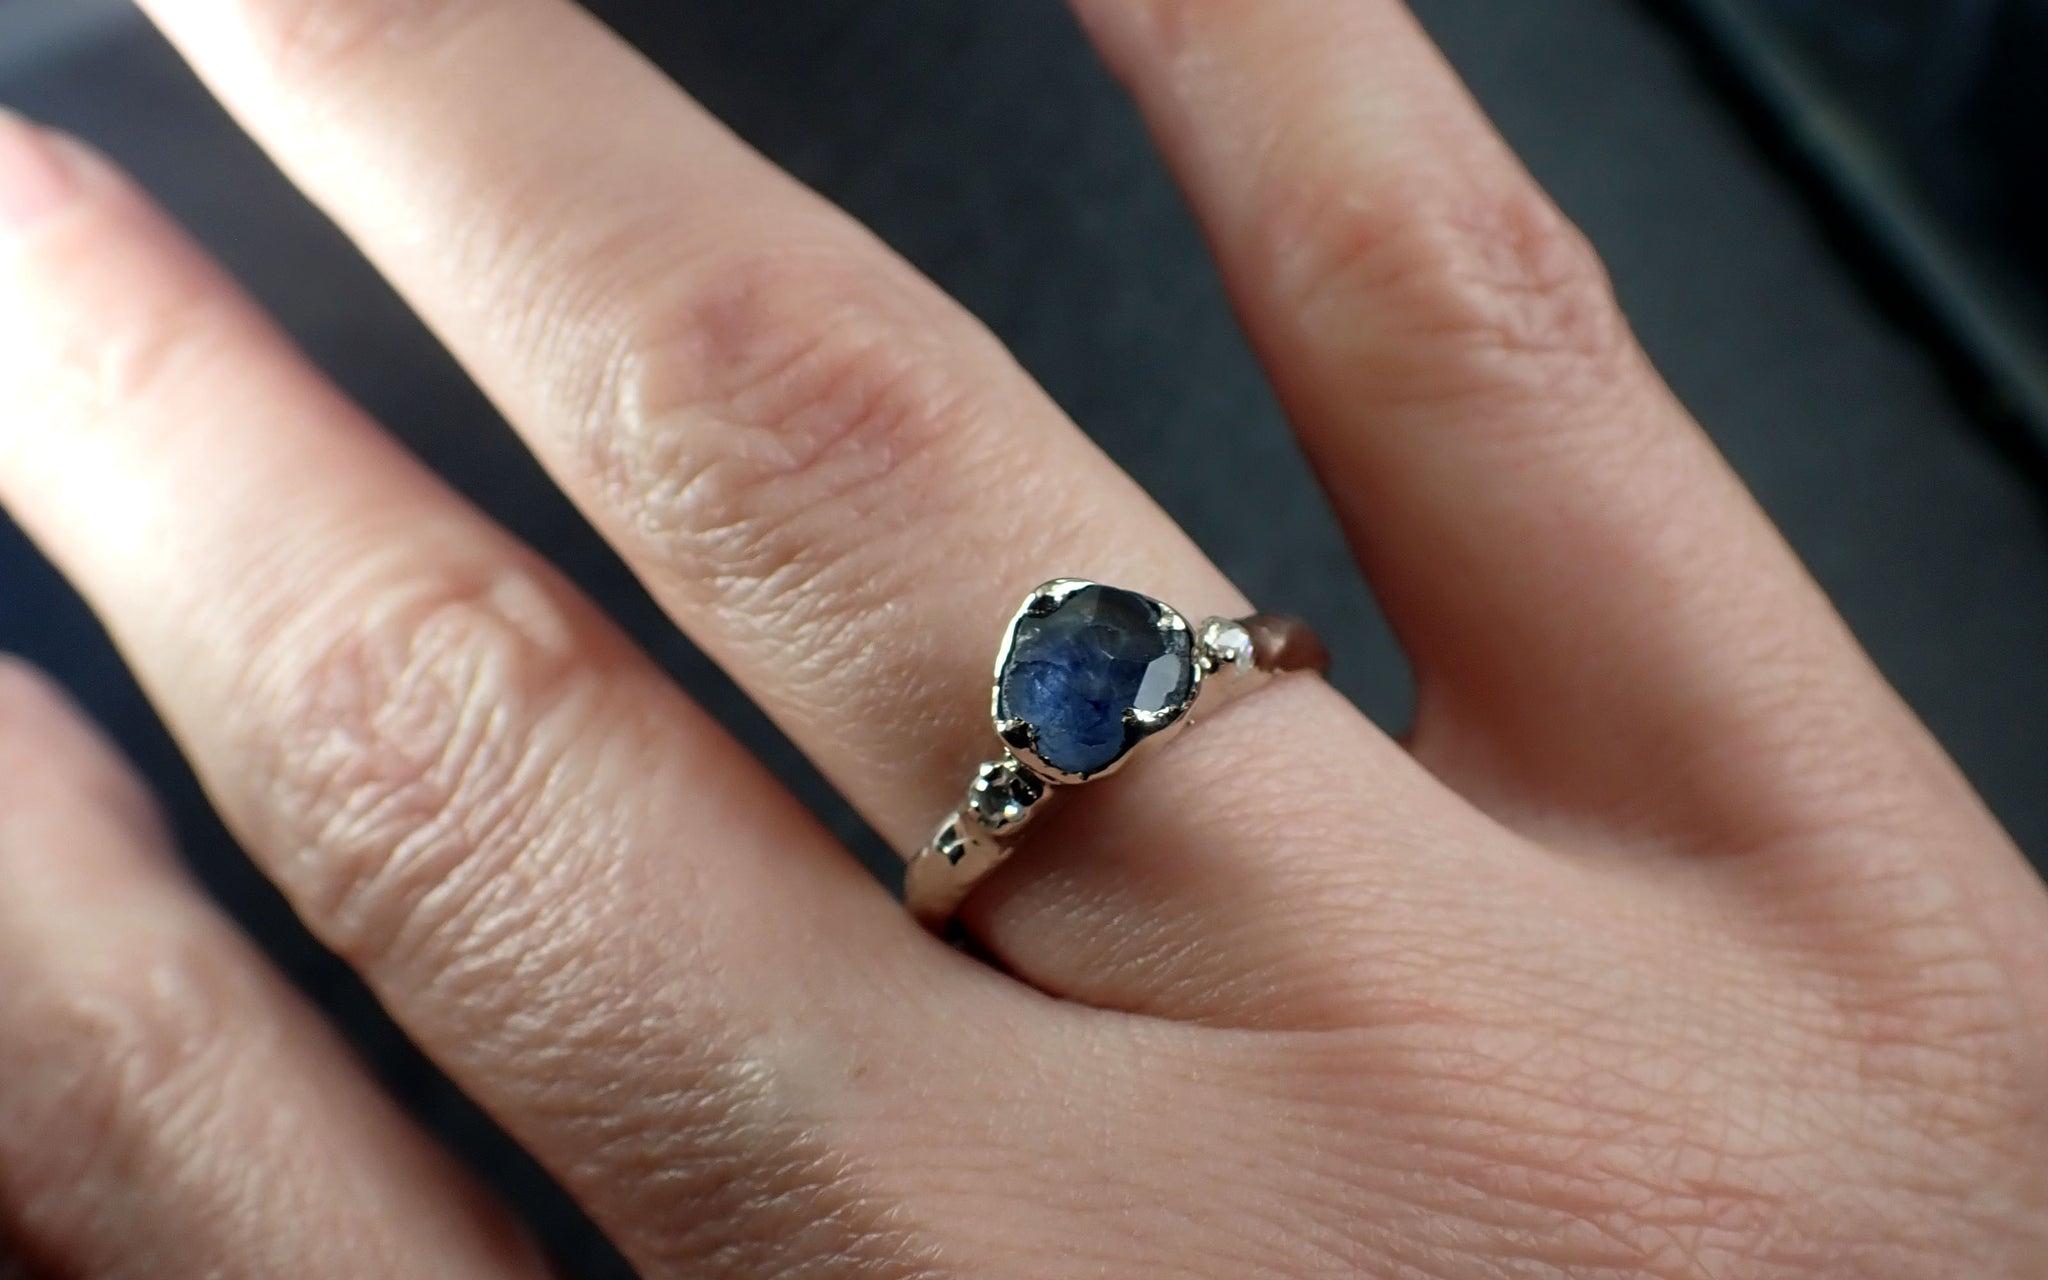 partially faceted blue montana sapphire and fancy diamonds 14k white gold engagement wedding ring custom gemstone ring multi stone ring 2830 Alternative Engagement